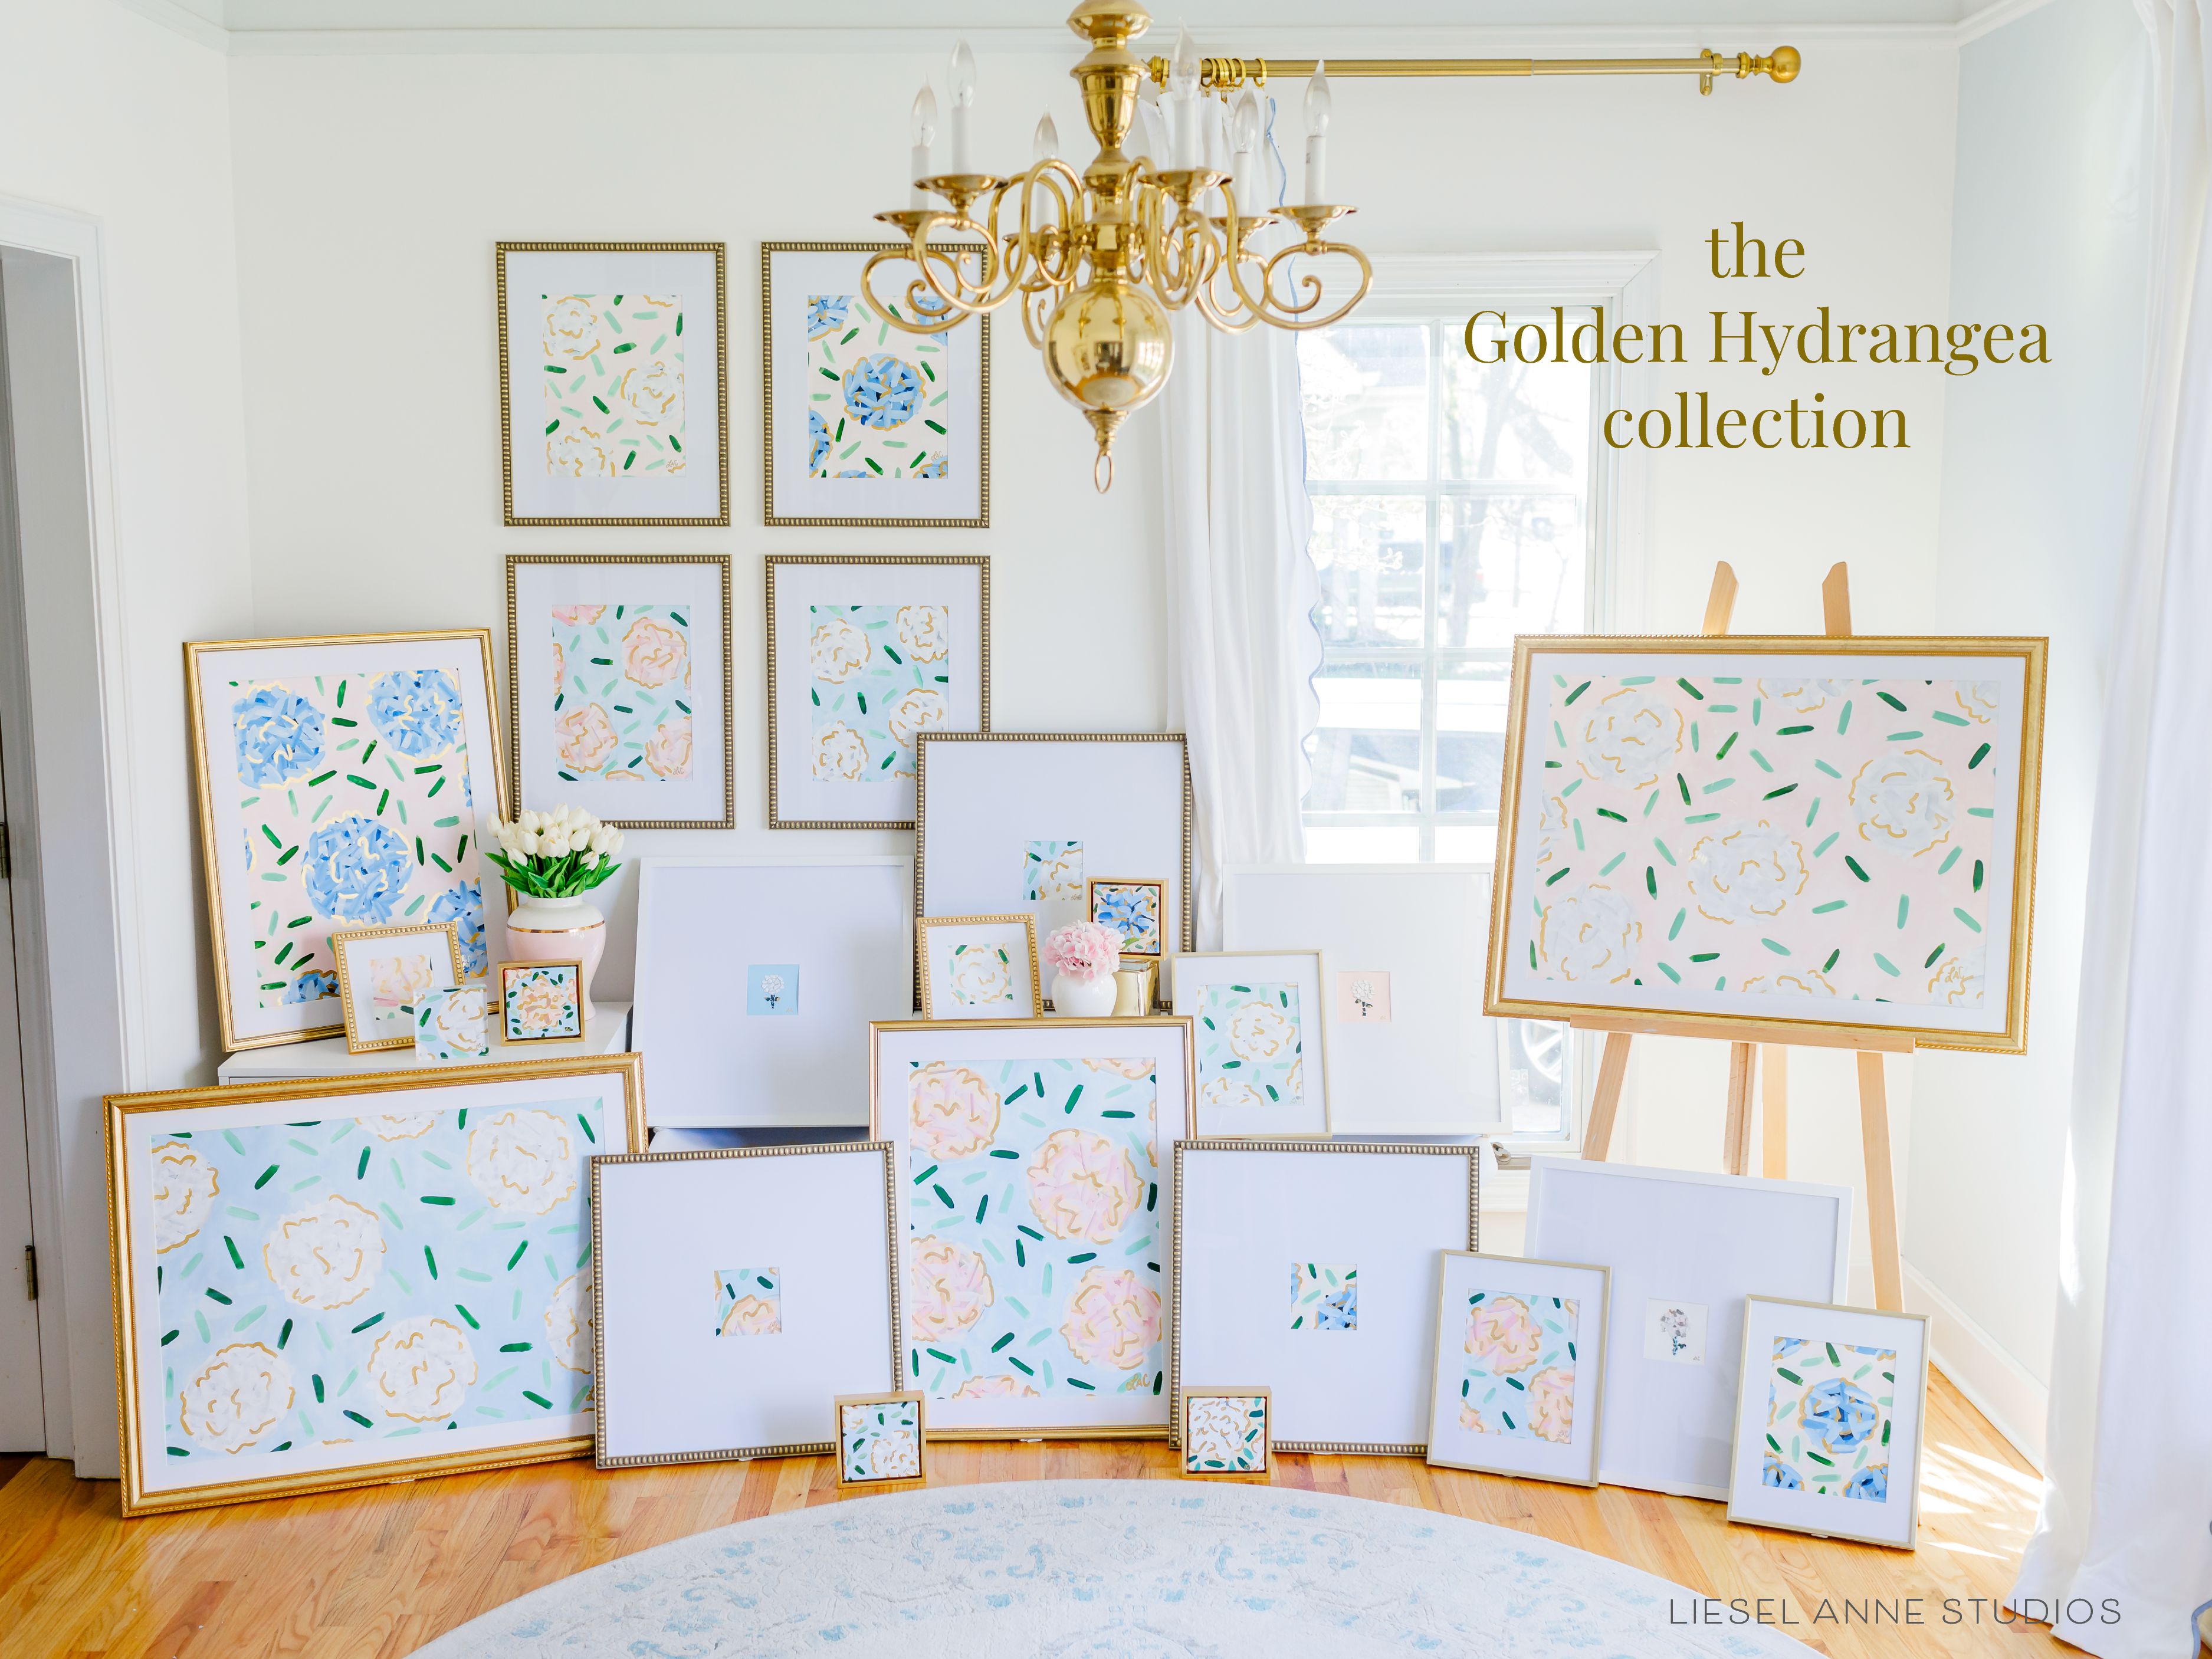 Golden Hydrangea | Blue & White XXIX-Original artwork measures 11"x14" | Framed in gold wood floater frame | Hand-Painted with gouache on stretched canvas | Features our signature Golden Hydrangea design with a light blue base, white hydrangeas and shimmery gold accents | Initialed in gold by the Liesel Anne (the artist) on the front and signed and dated on the back-The Singing Little Bird